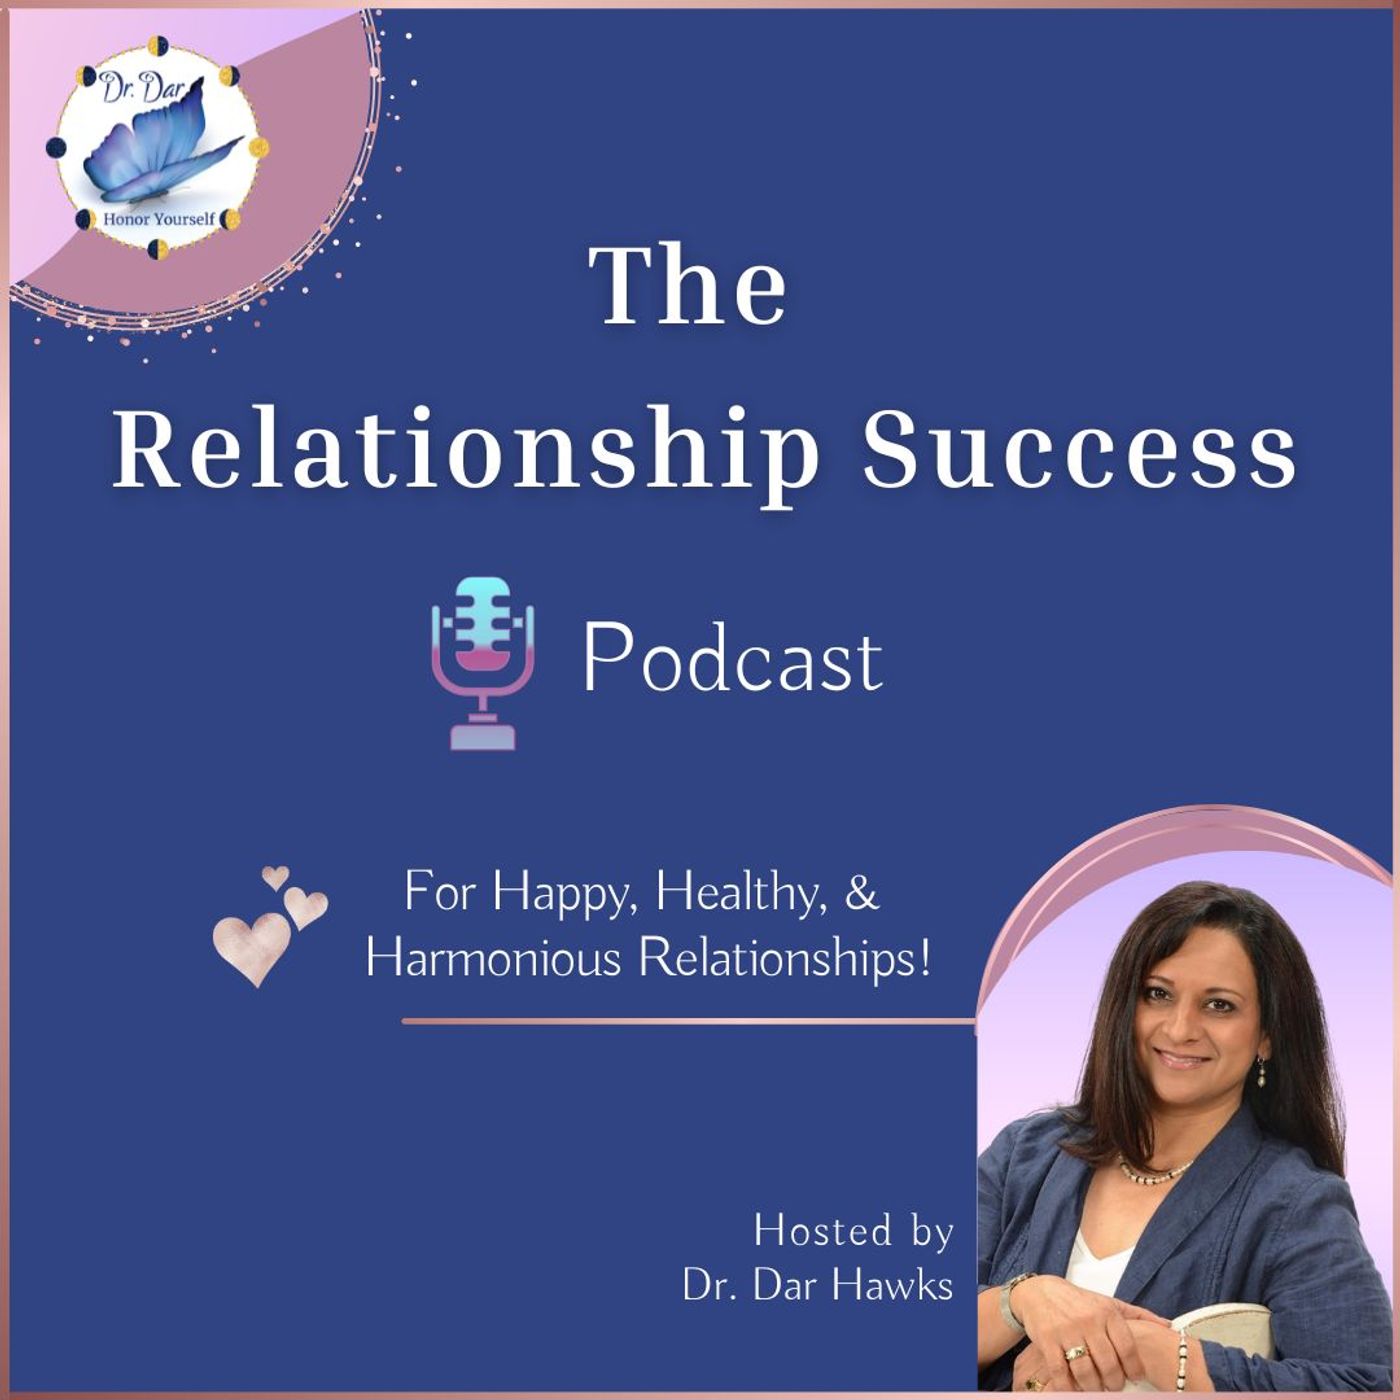 The Relationship Success Podcast